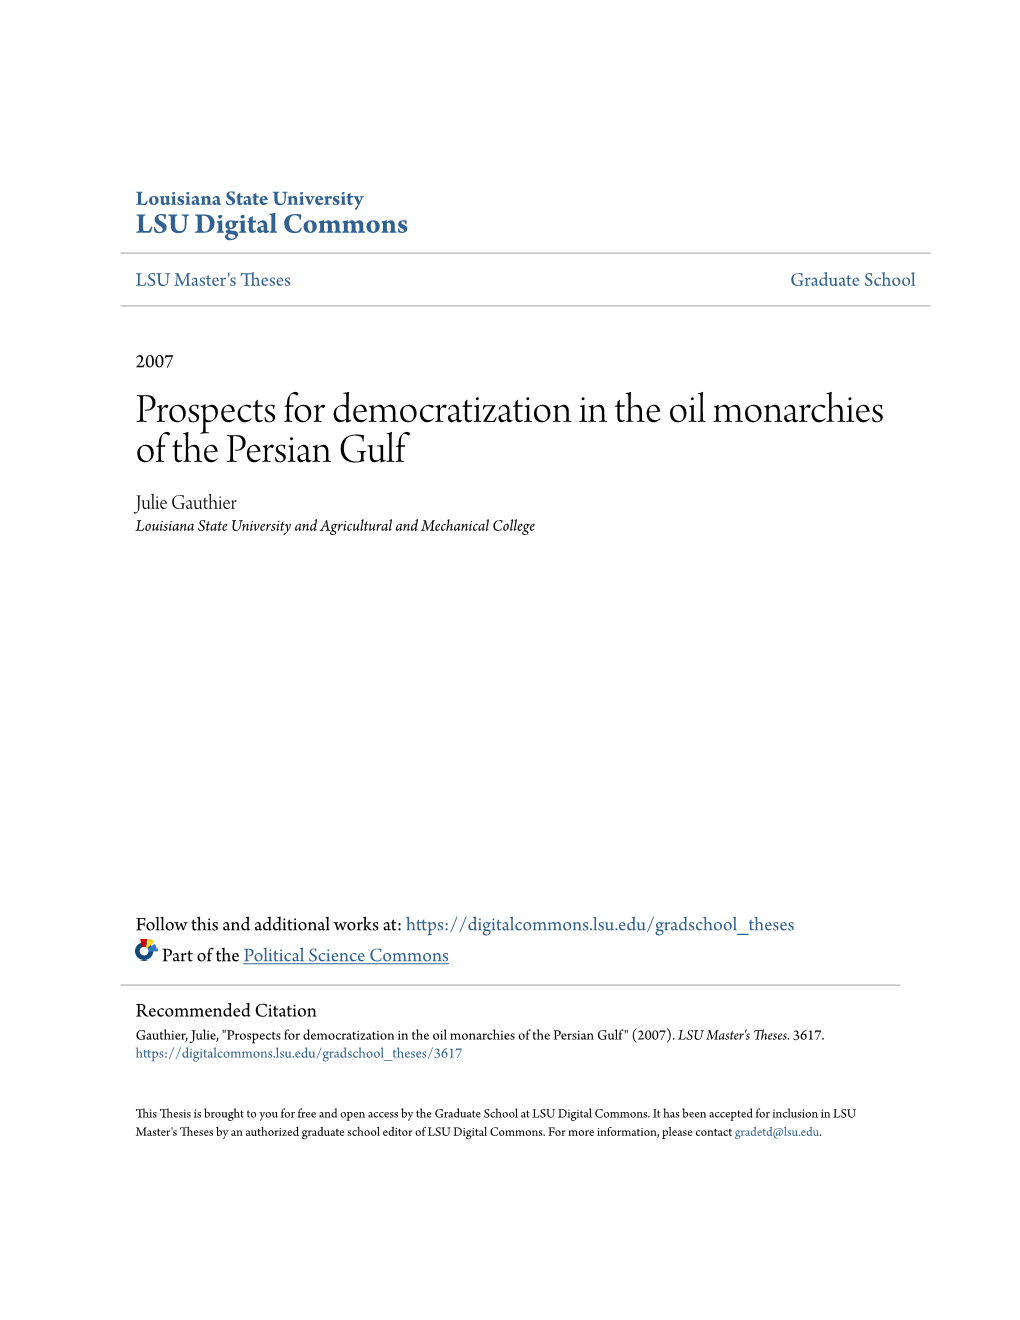 Prospects for Democratization in the Oil Monarchies of the Persian Gulf Julie Gauthier Louisiana State University and Agricultural and Mechanical College